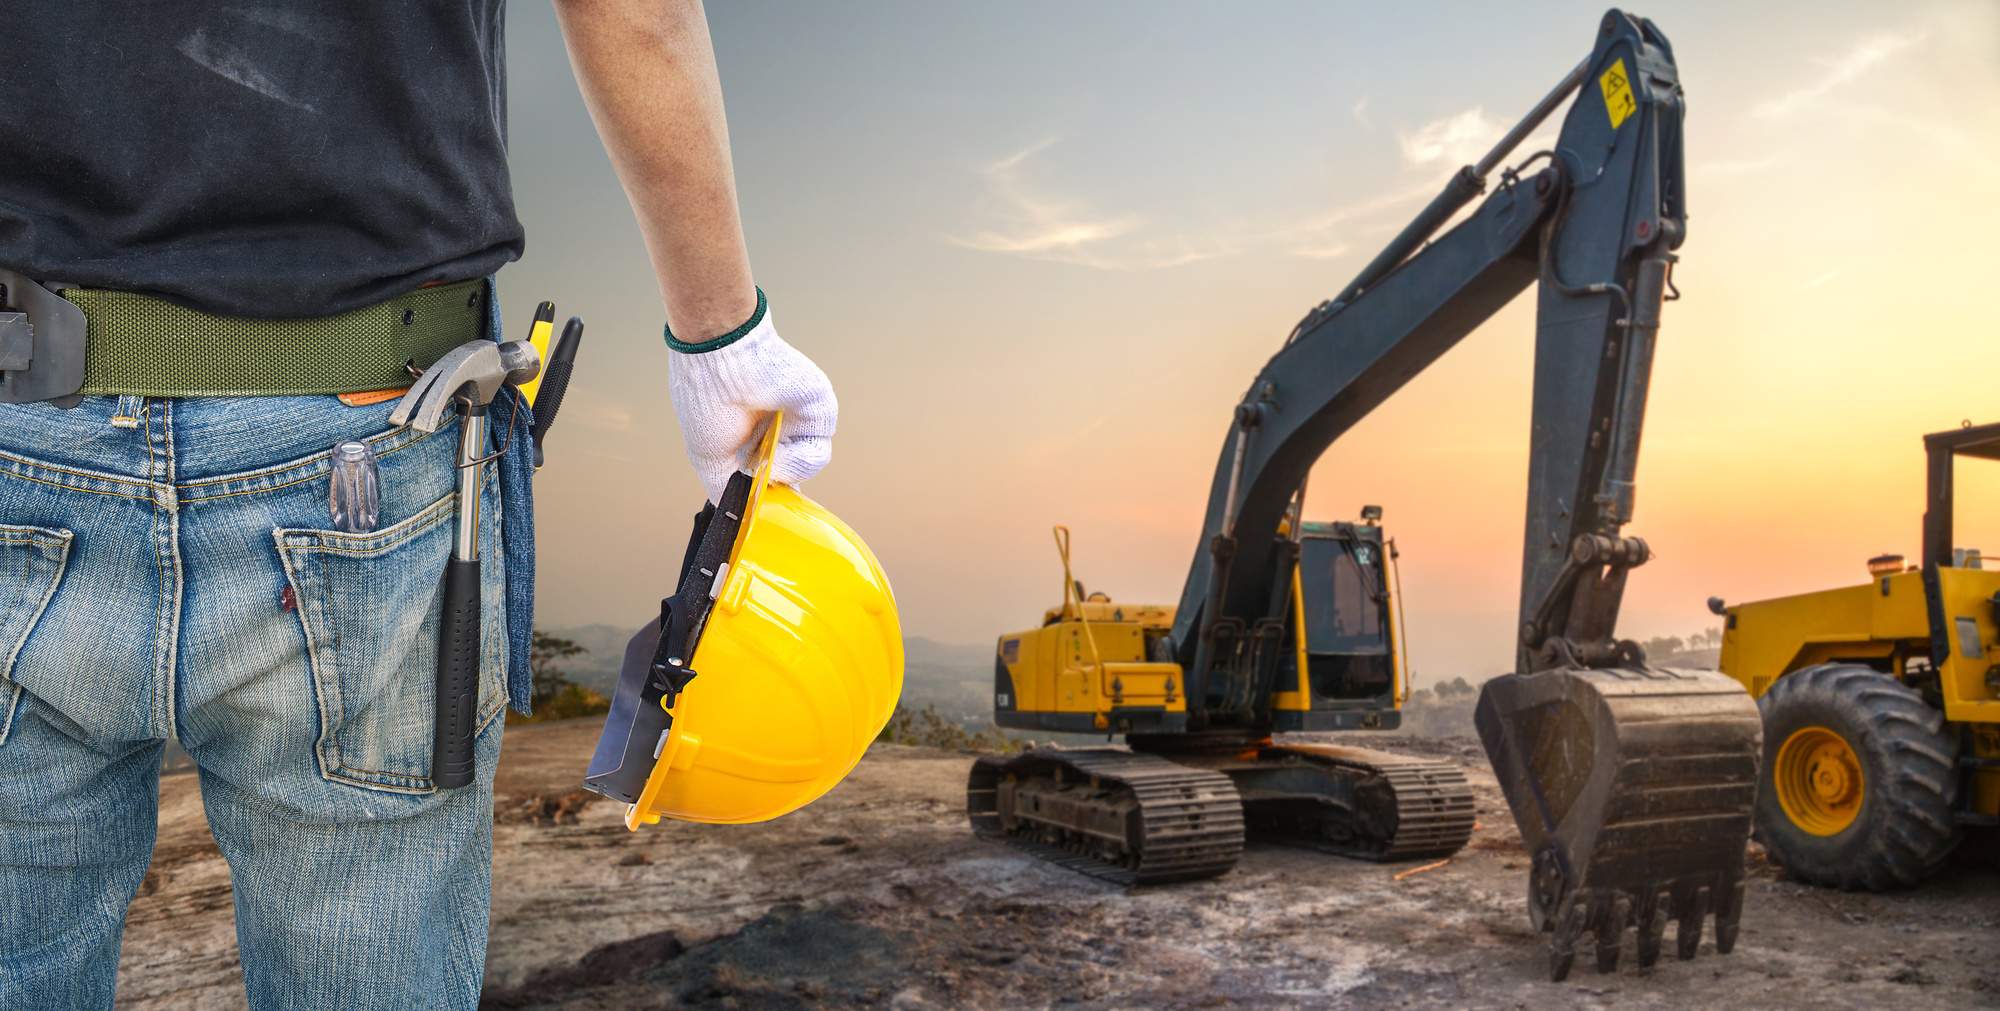 How To Start a Construction Company in 5 Easy Steps